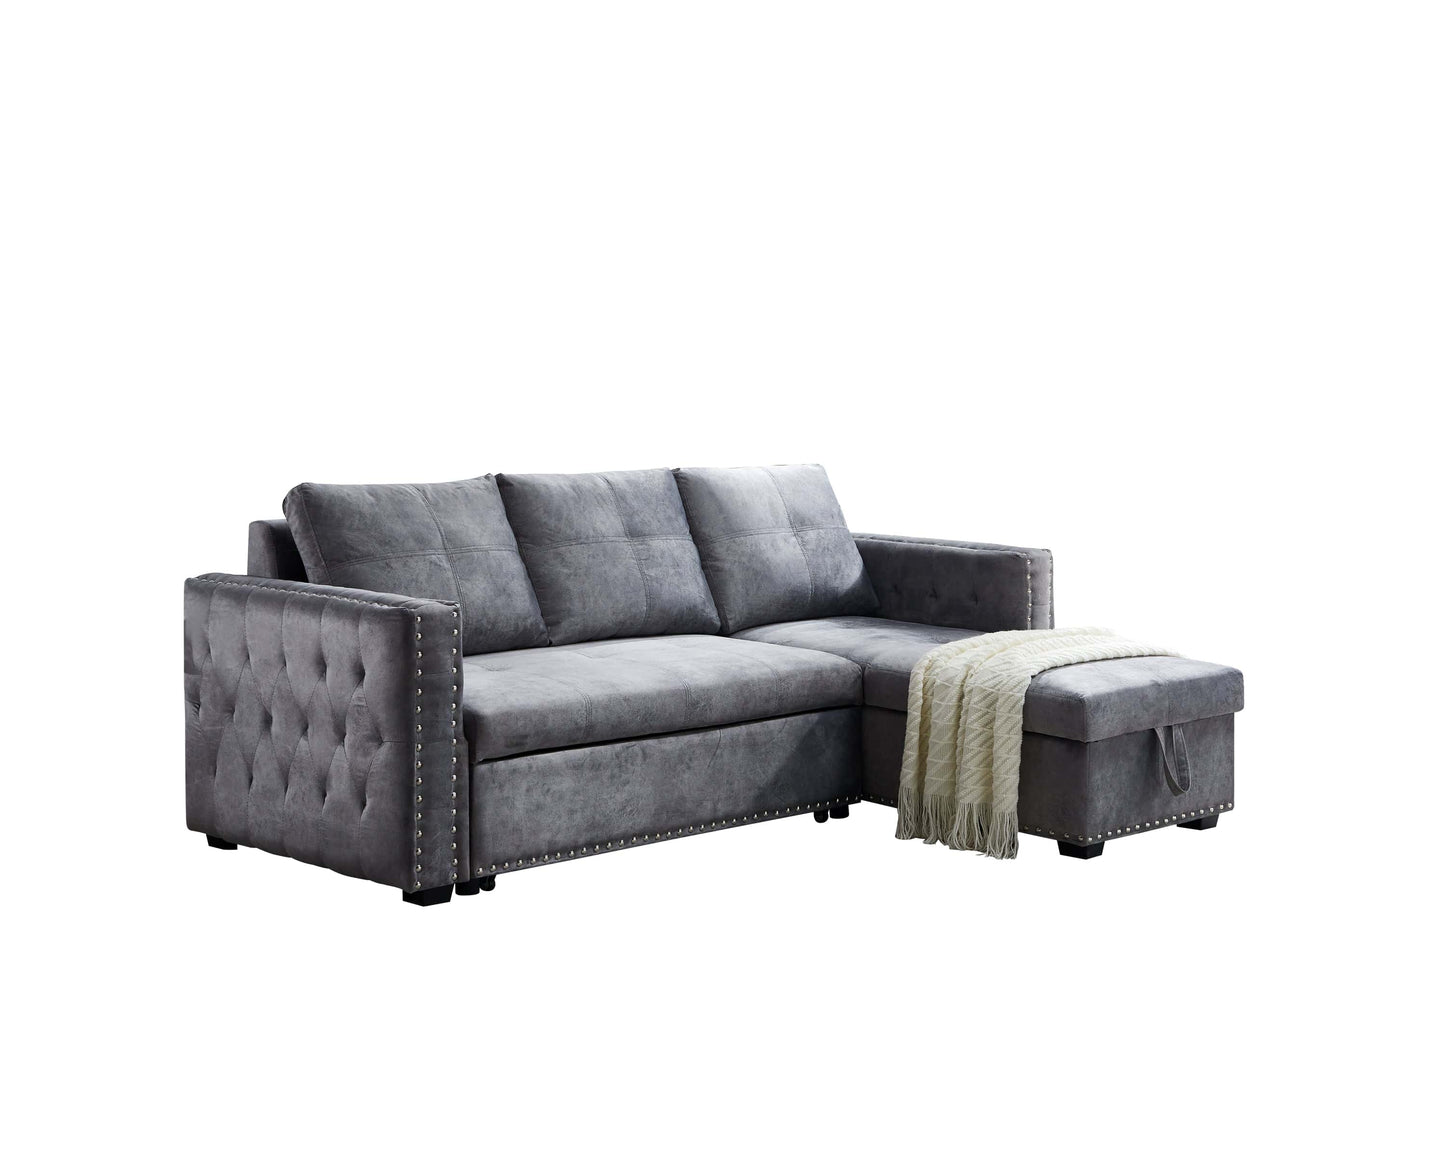 Sectional sofa with pulled out bed,  2 seats sofa and reversible chaise with storage, both hands with copper nail, GREY, (91" x 64" x 37")